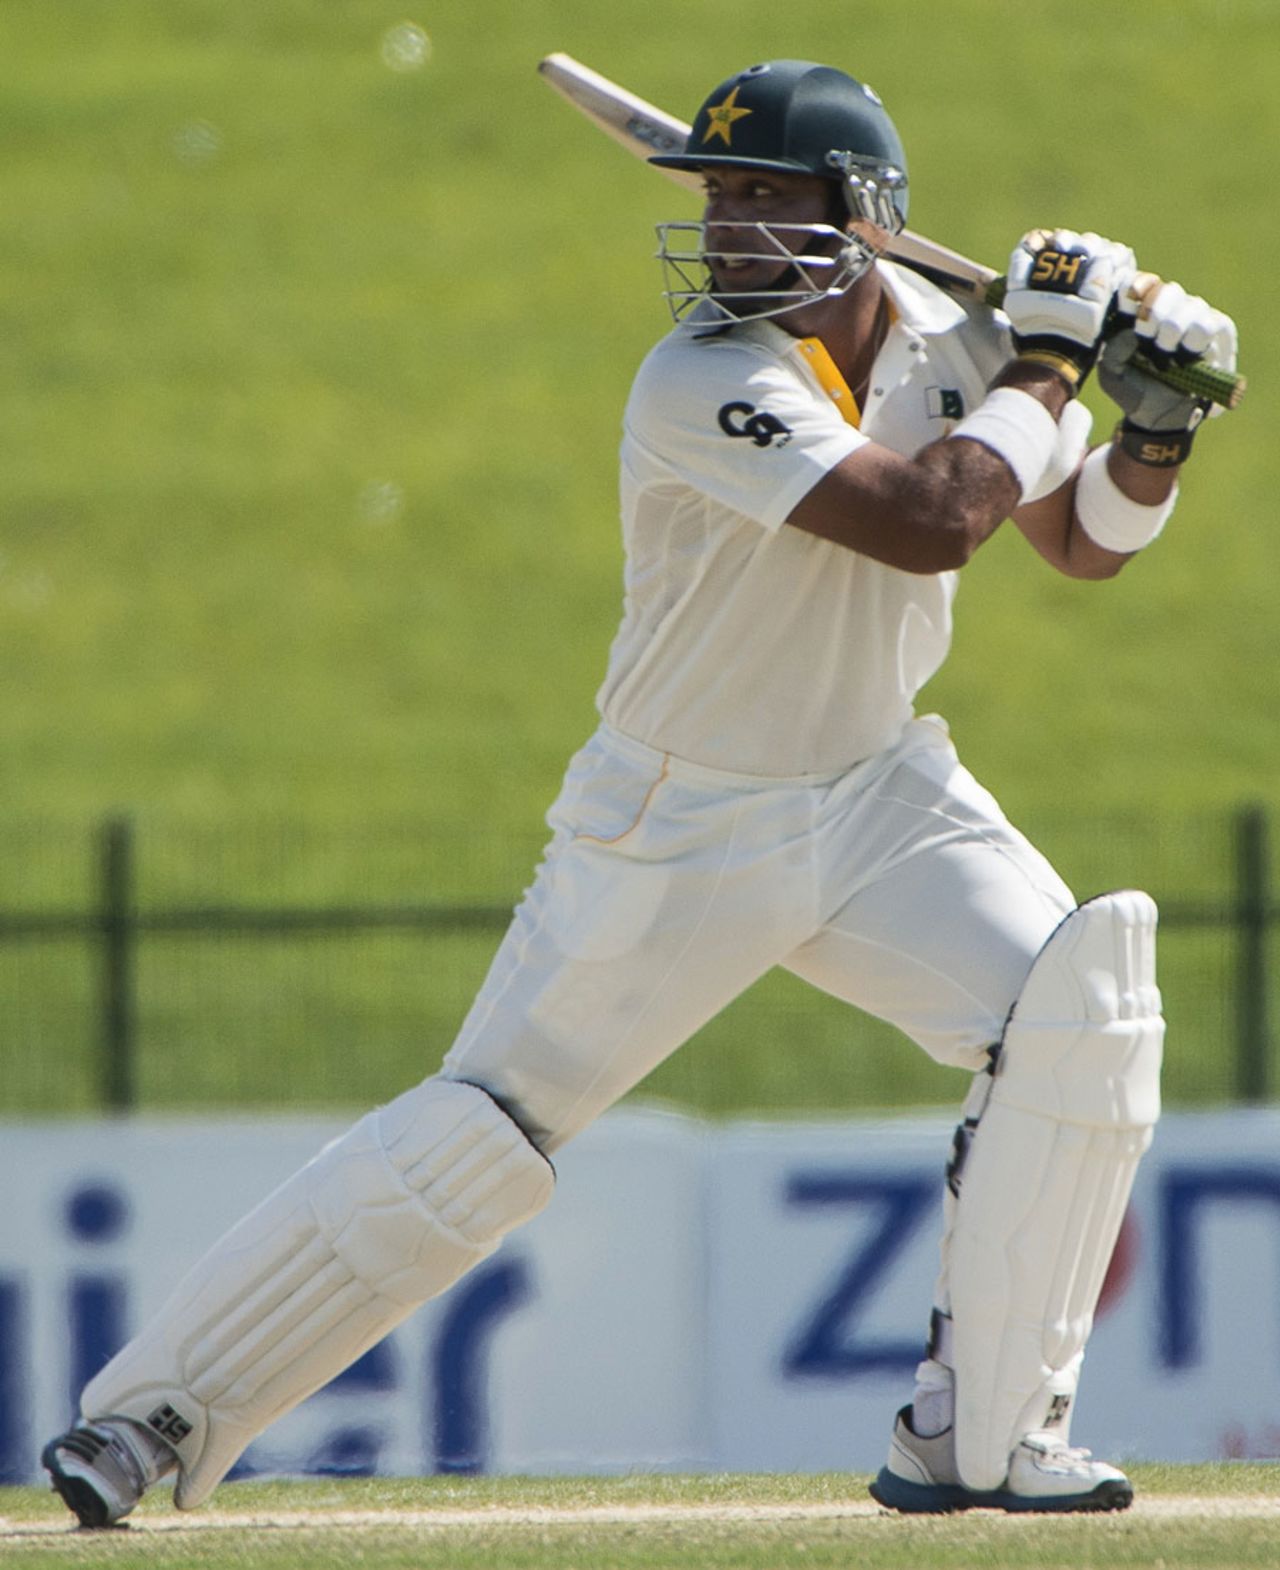 Khurram Manzoor added 15 runs to his overnight score of 131 before being dismissed, Pakistan v South Africa, 1st Test, 3rd day, Abu Dhabi, October 16, 2013